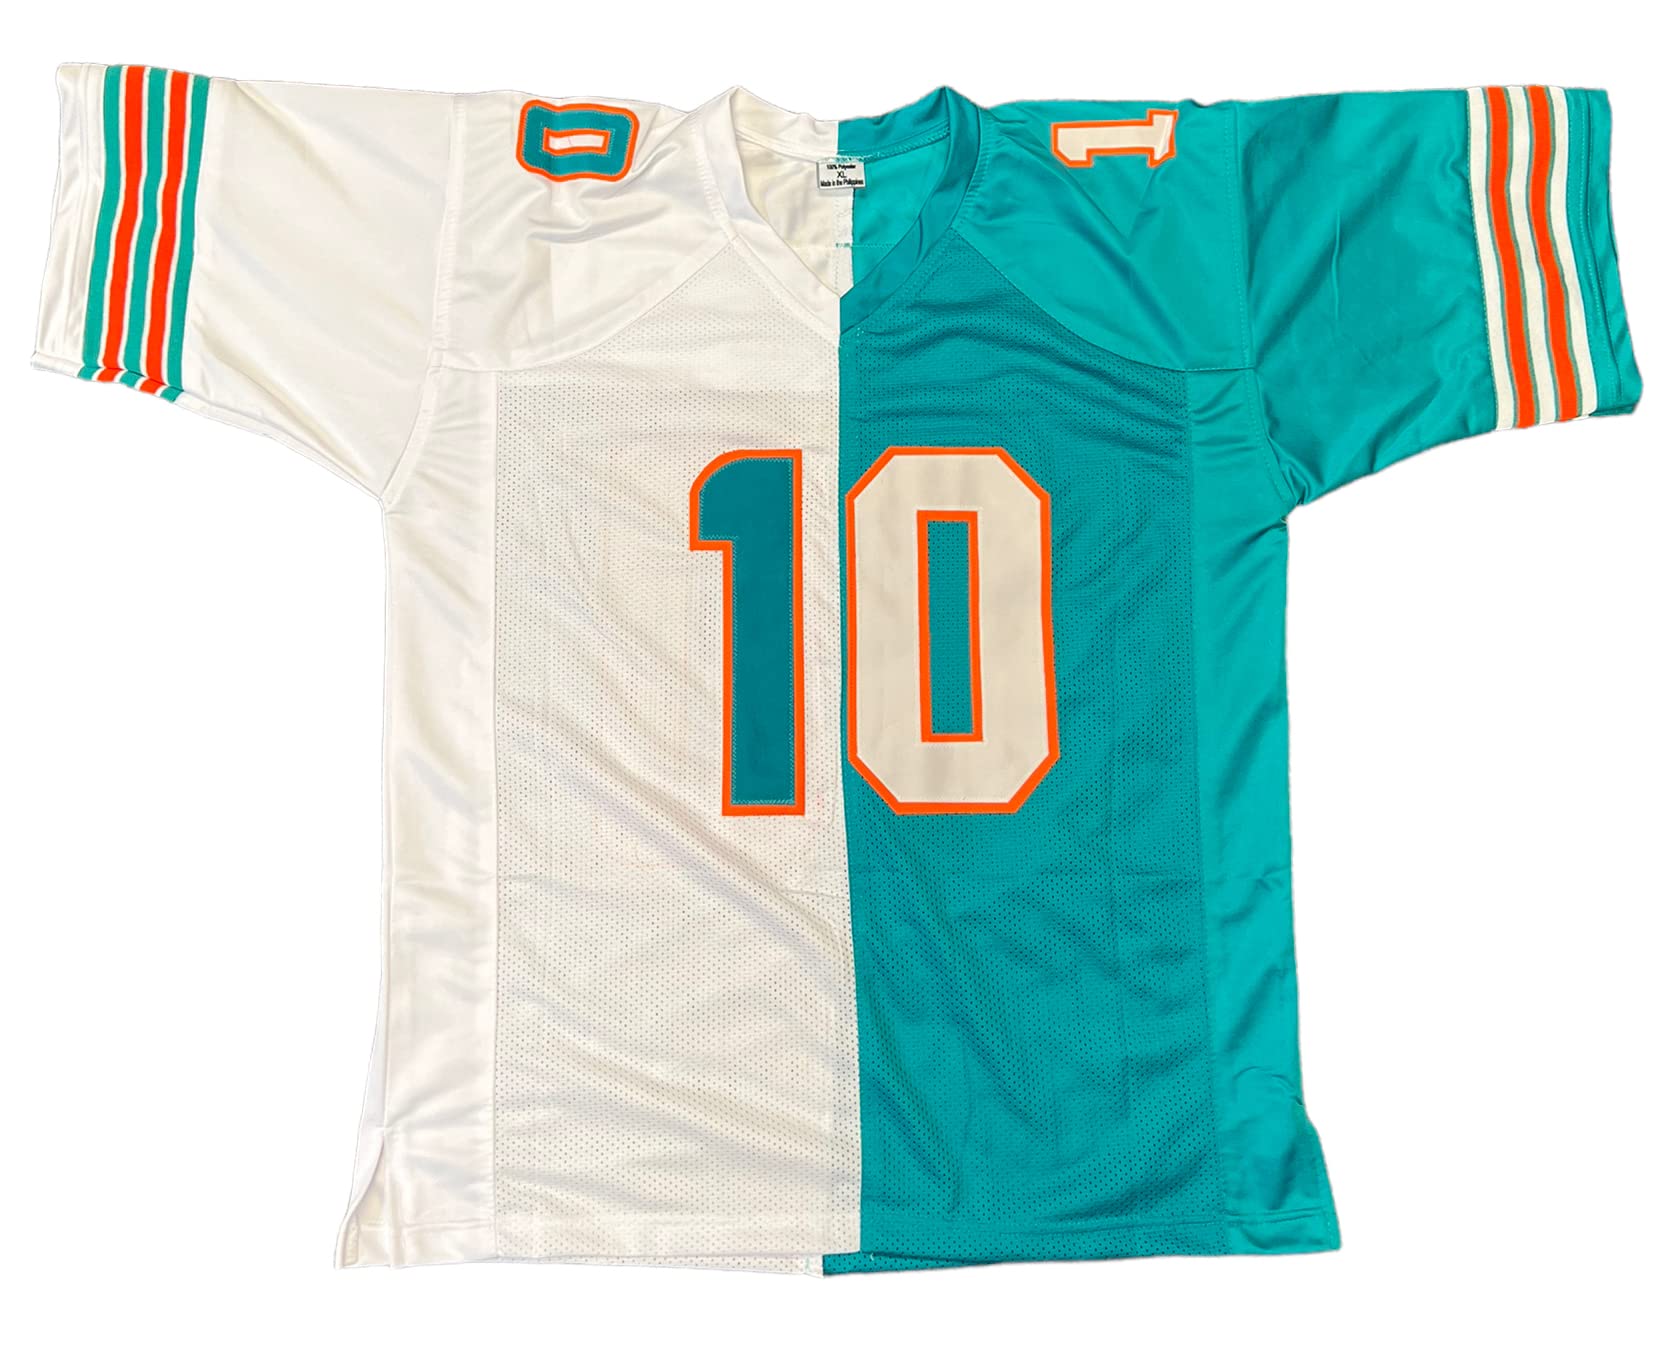 Tyreek Hill Miami Dolphins Stitched Football Jersey XL